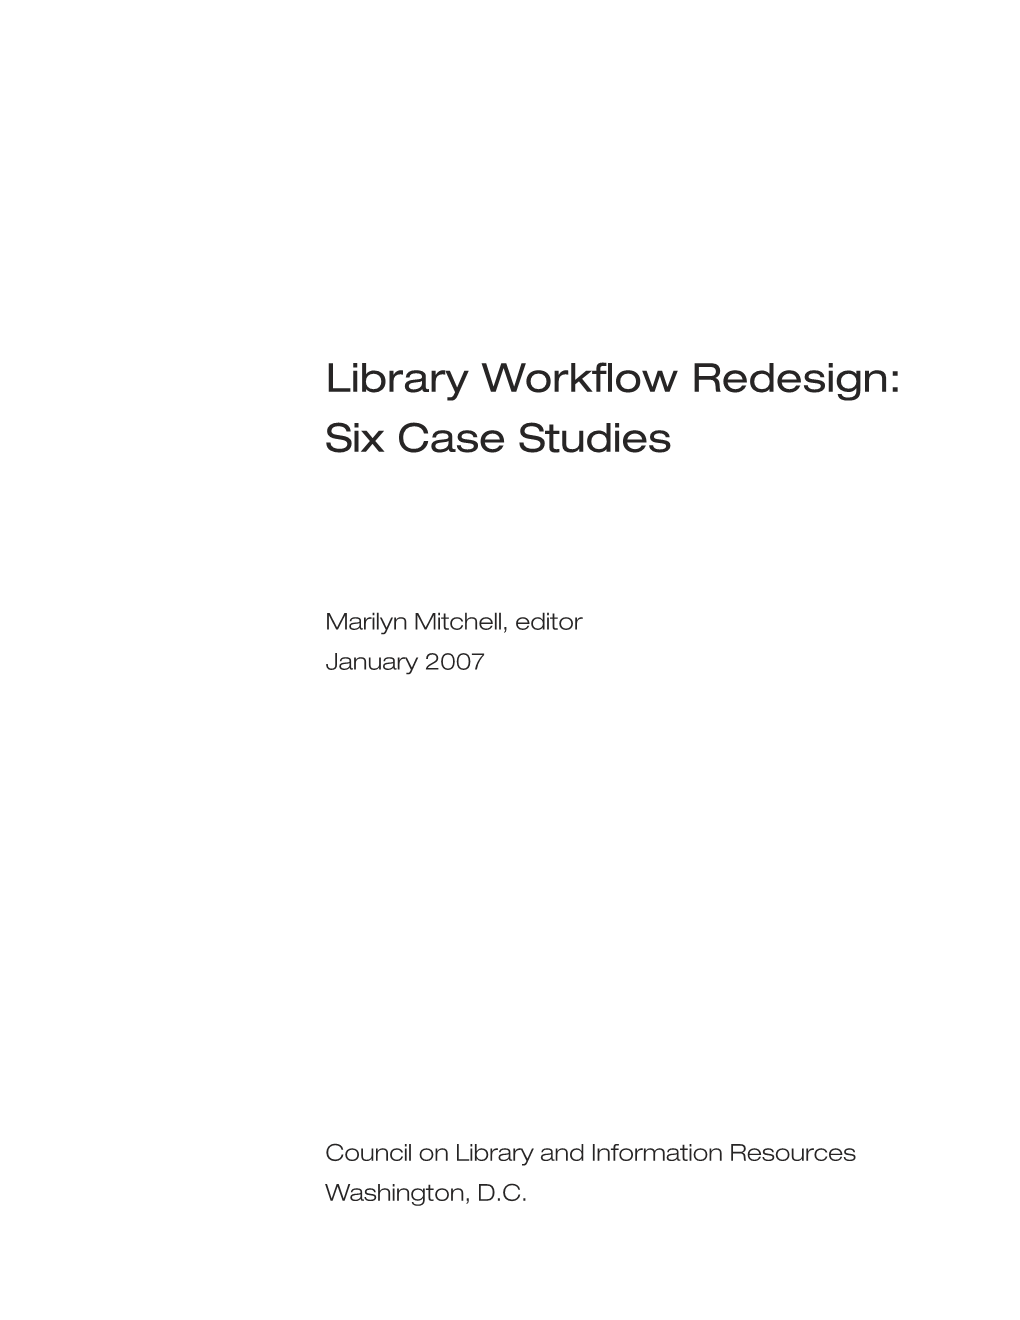 Library Workflow Redesign: Six Case Studies